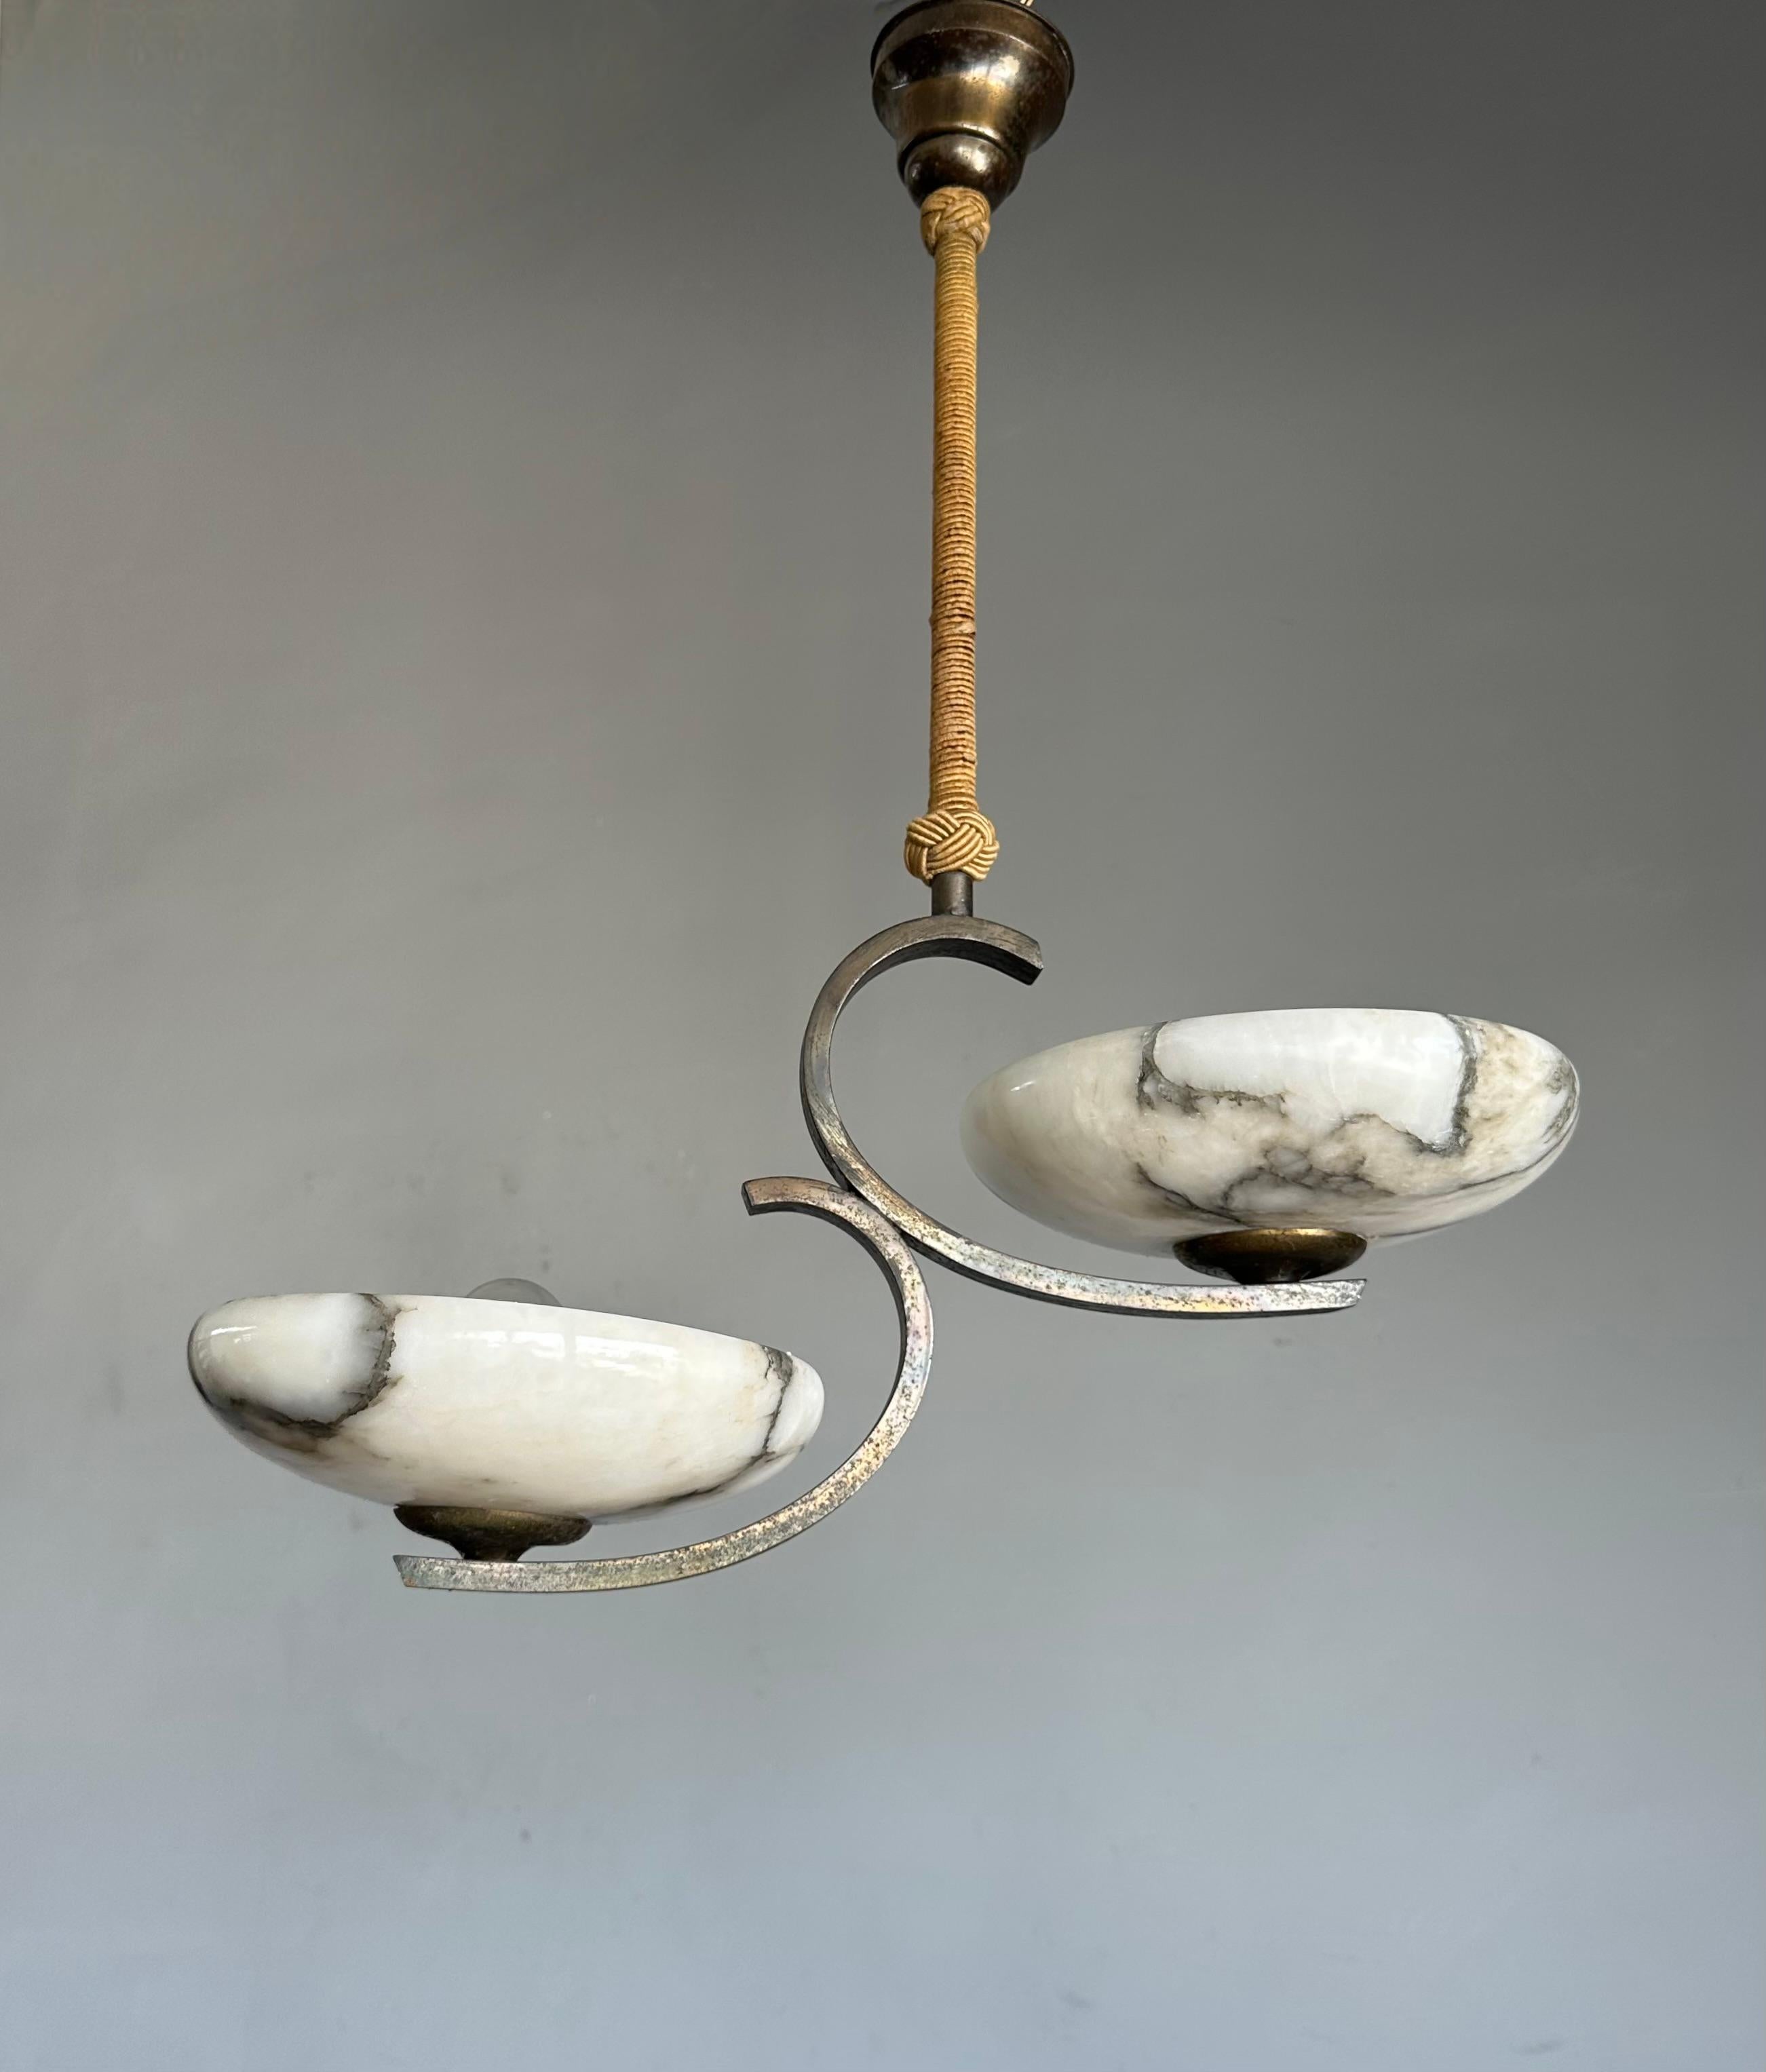 Top Art Deco Design Brass and Two Light Alabaster shades Pendant Light / Fixture For Sale 6